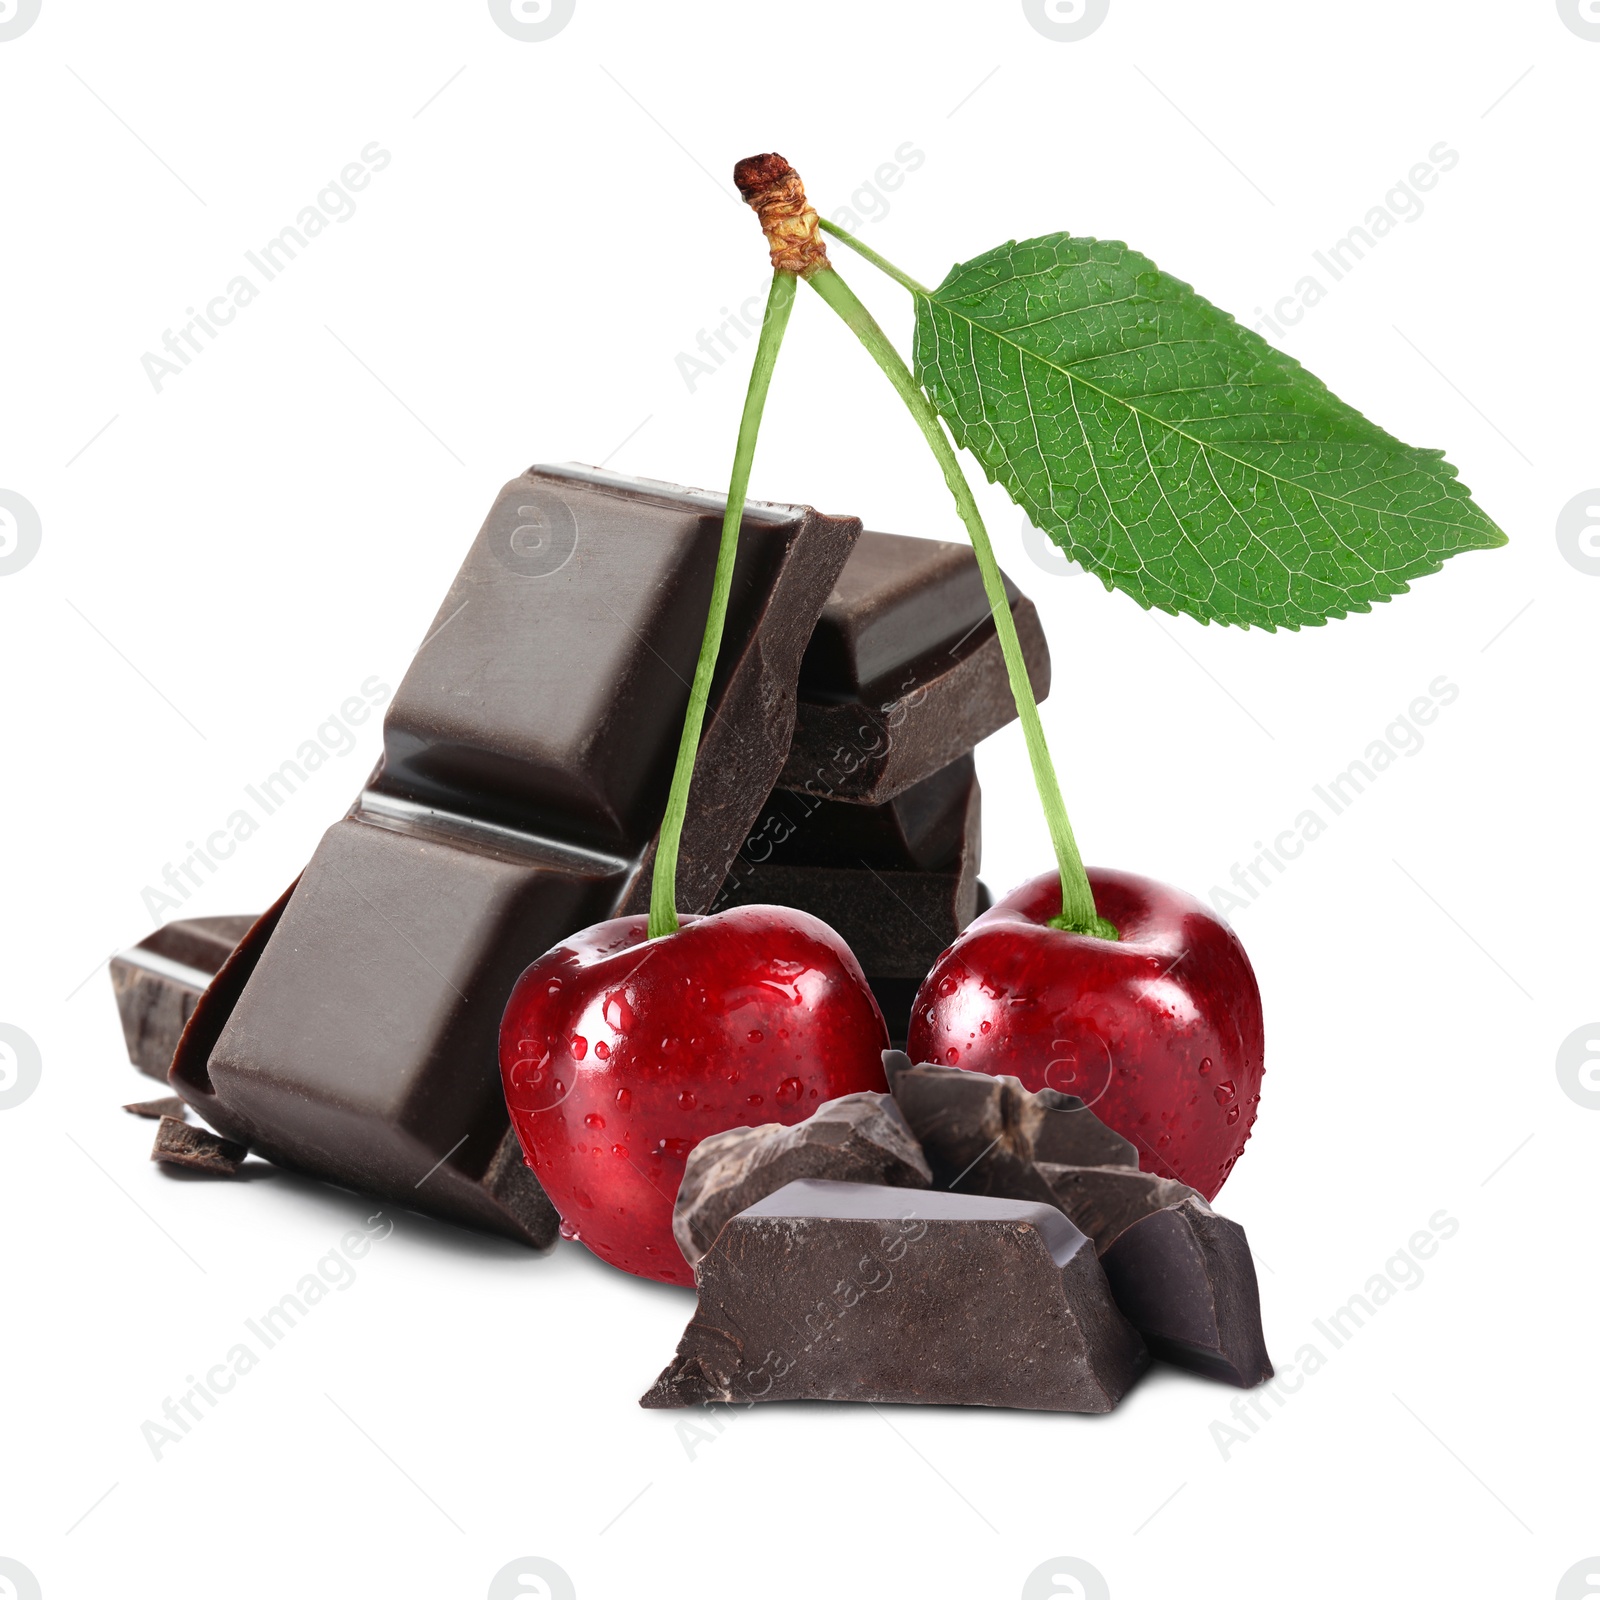 Image of Fresh cherries and pieces of dark chocolate isolated on white